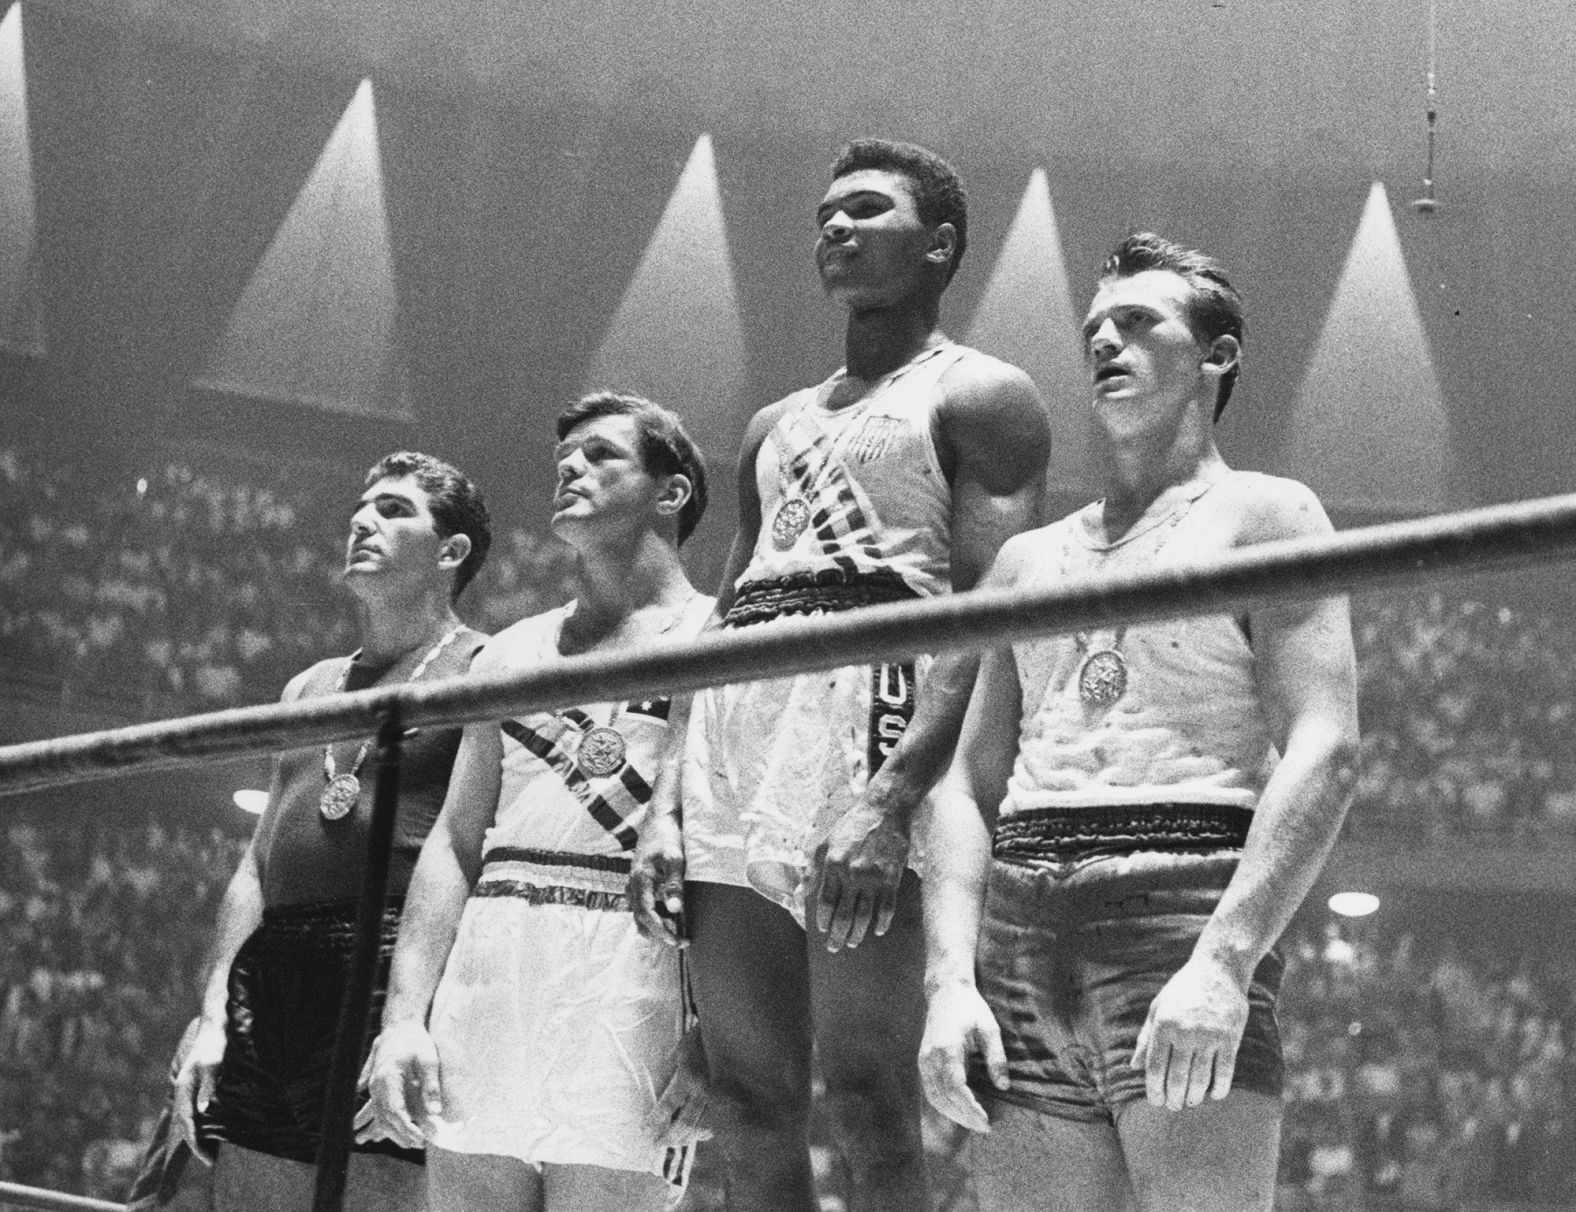 Muhammad Ali rose to prominence at the 1960 Olympic Games in Rome, where he claimed a gold medal in the light-heavyweight division. The story goes that when he returned to a hometown parade, even with the medal around his neck, he was refused service in a segregated restaurant because of his race. According to several reports, he threw the medal into a river out of anger. The story is disputed by people who say Ali misplaced the medal. Thirty-six years later, he was given a replacement medal and asked to light the cauldron at the 1996 Olympic Games in Atlanta, something he said was one of the greatest honors in his athletic career.